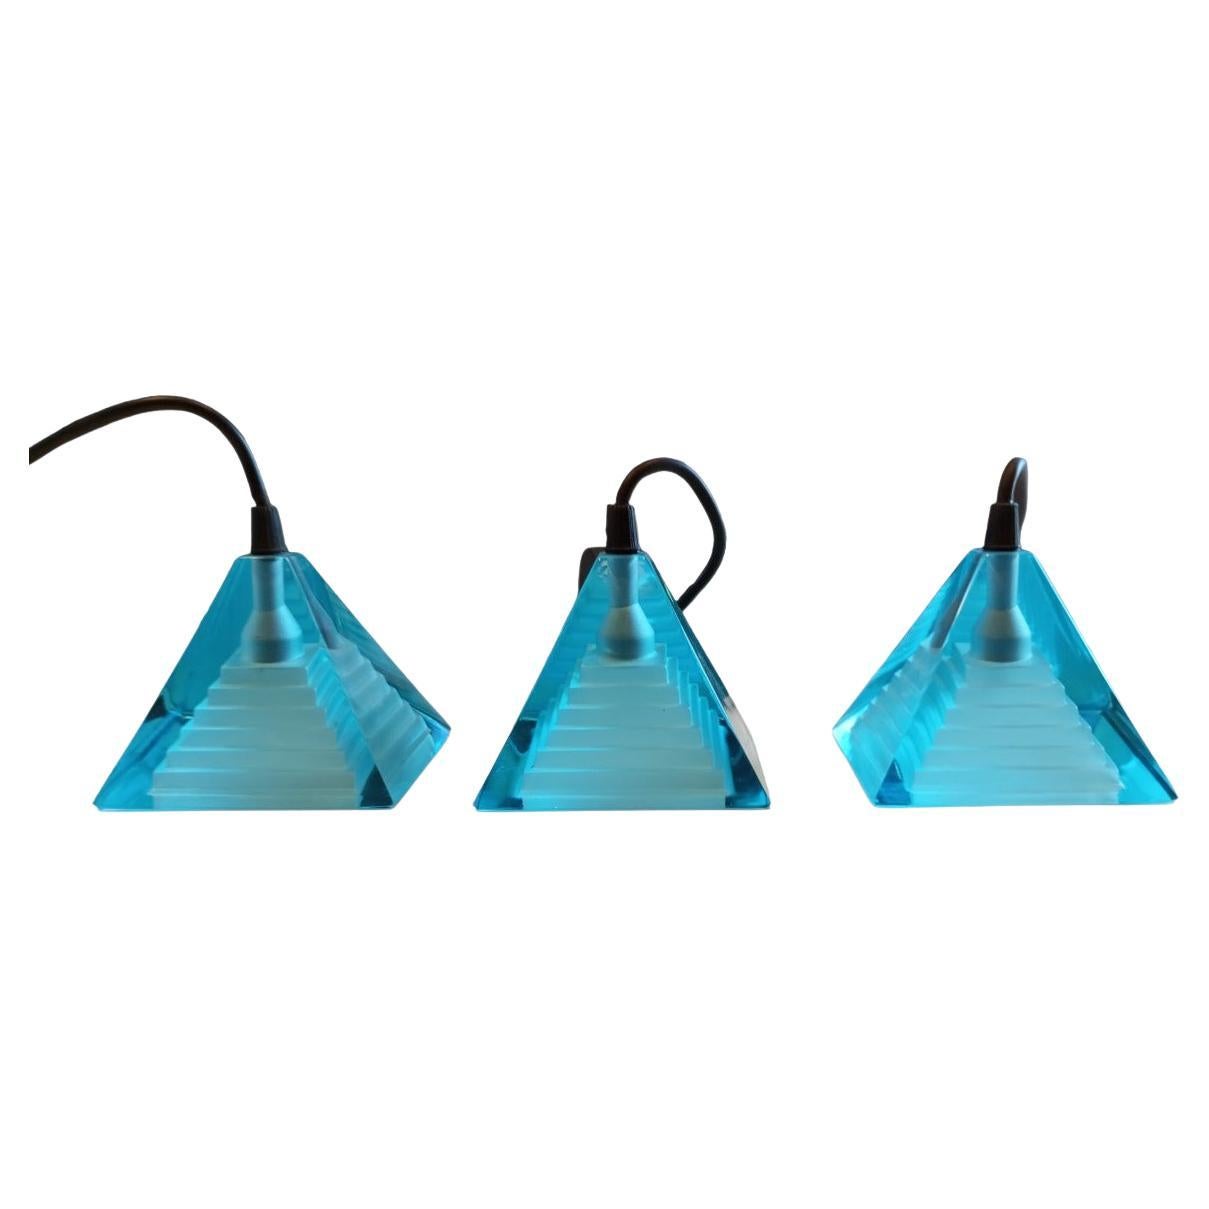 Three blue 'Pyramid' lamps designed by Paolo Piva for Mazzega - Murano glass For Sale